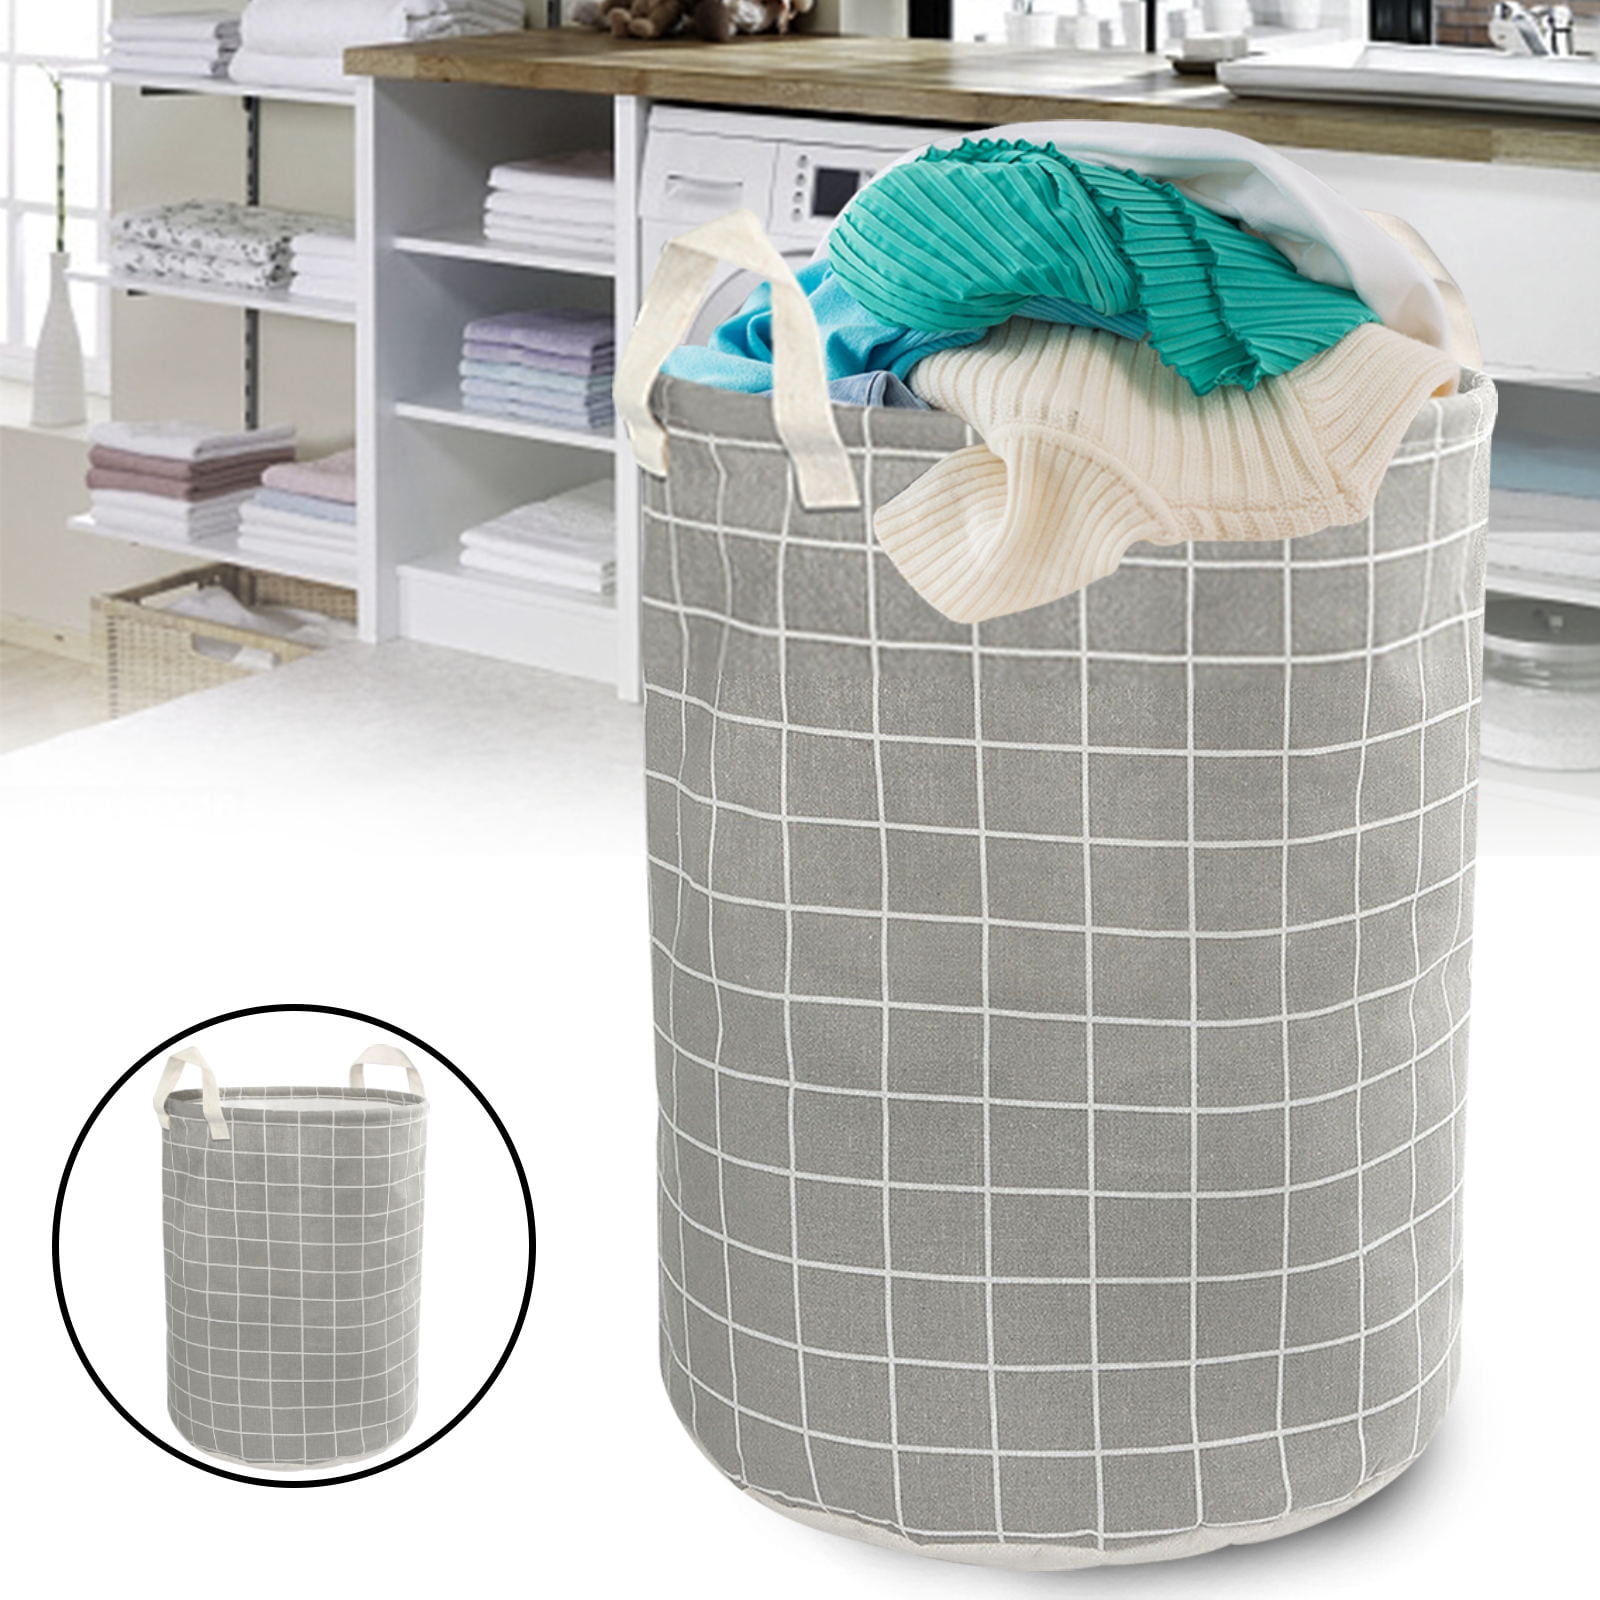 TEGOOL Pop Up Laundry Hamper,Collapsible Horizontal Baskets with Handles & Side Pocket,Foldable Sturdy Mesh for Laundry Room,Bathroom,Kids Room,College